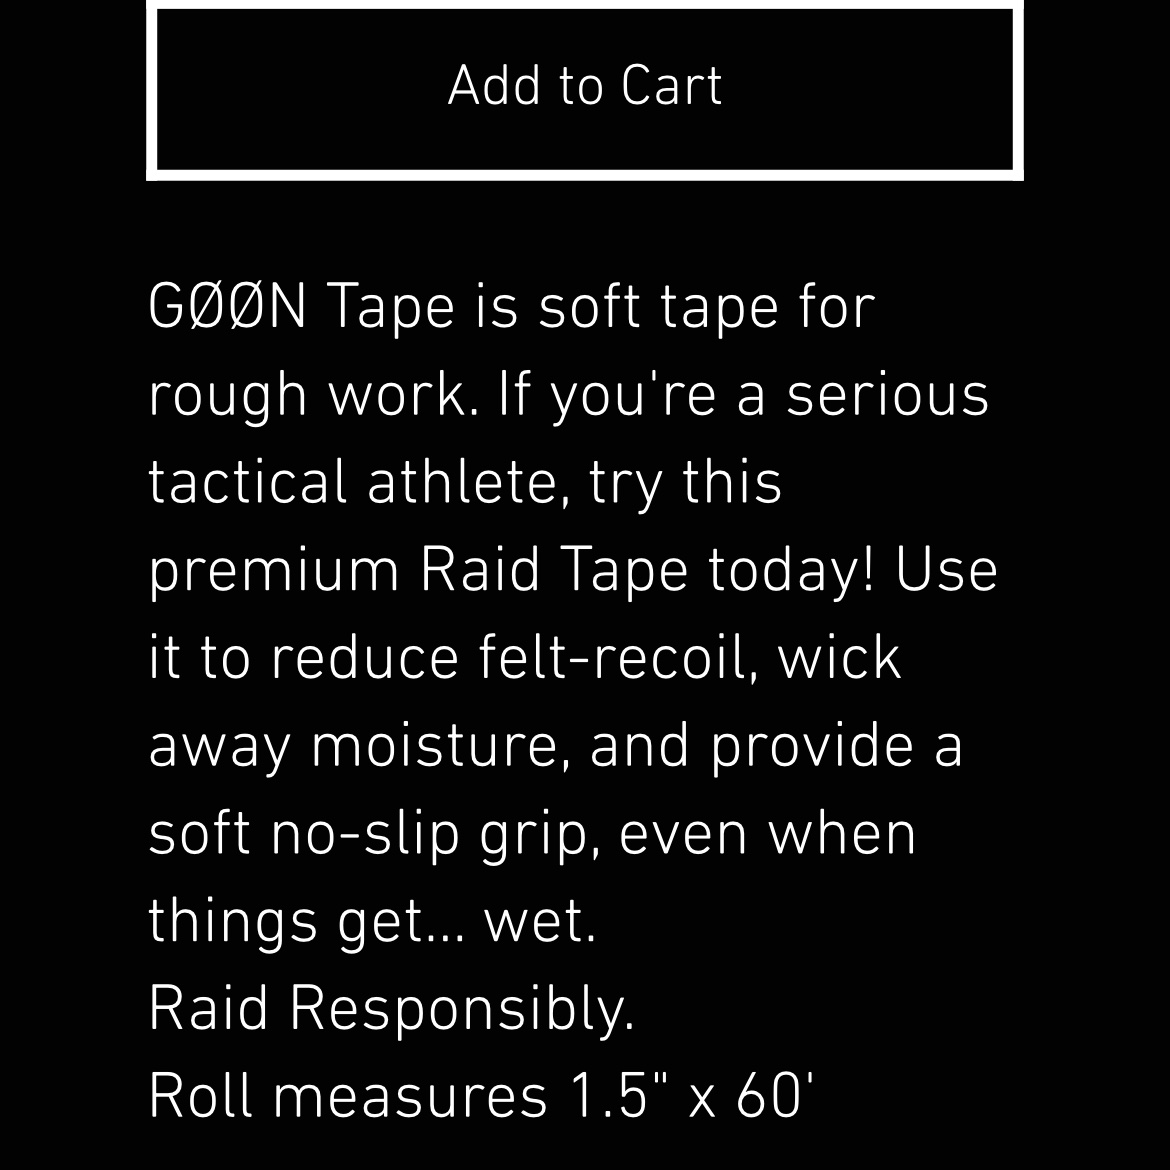 Aetius on X: Discovered that someone rebranded hockey tape as GOON tape.  What do they mean when things get wet when you are out gooning?   / X